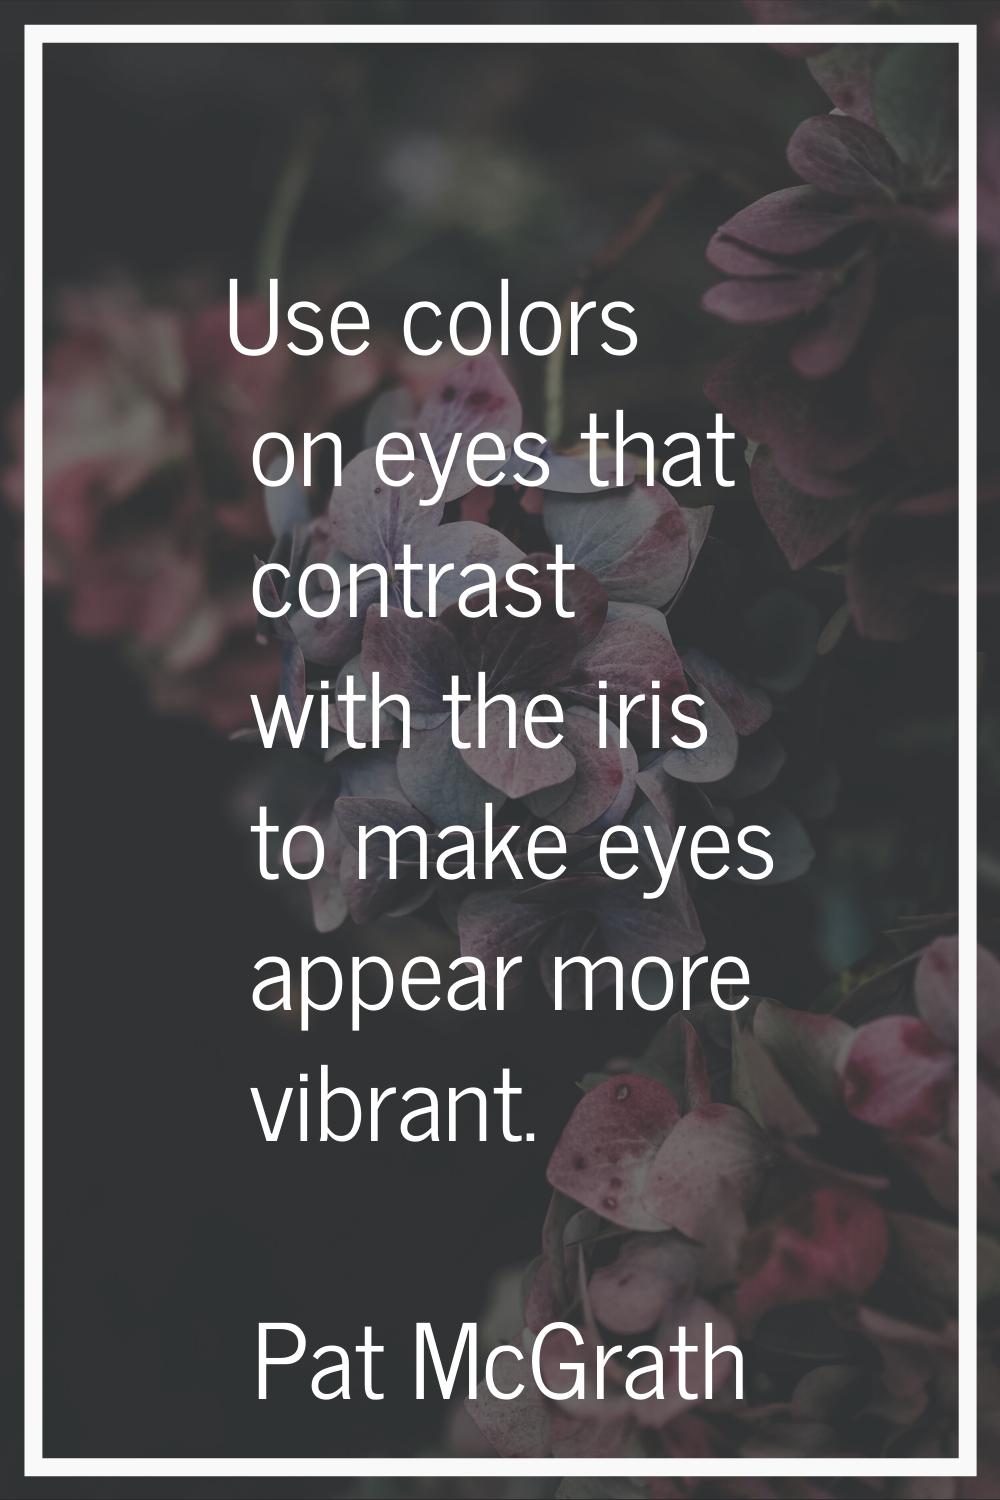 Use colors on eyes that contrast with the iris to make eyes appear more vibrant.